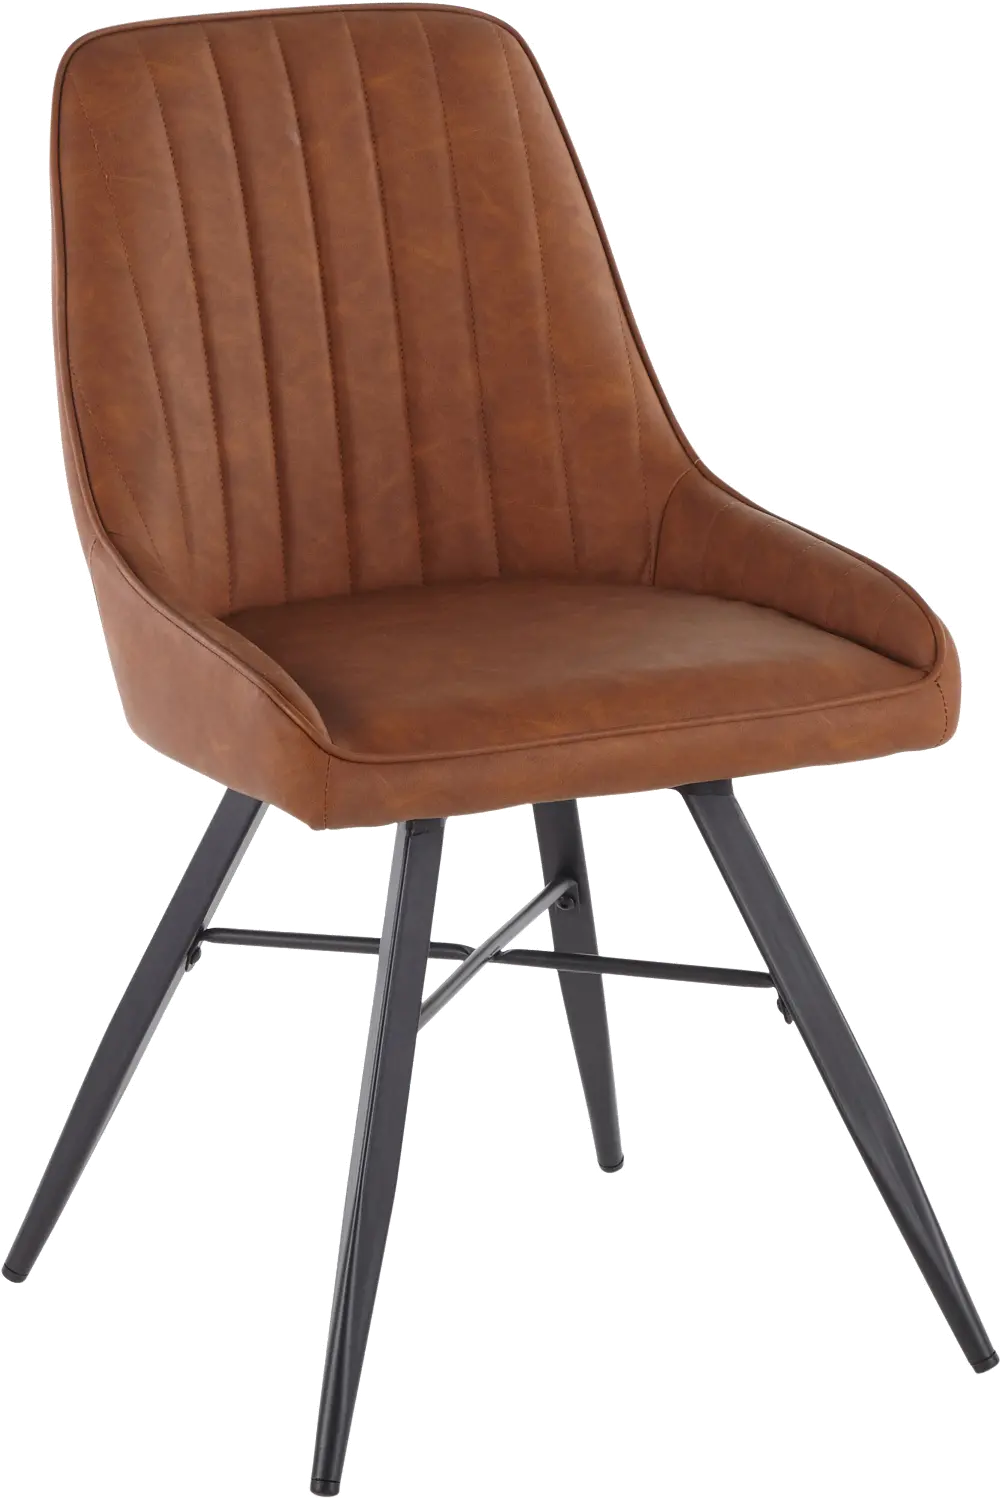 CH-CAVLER BKCAM Cavalier Camel Faux Leather Swiveling Chair-1